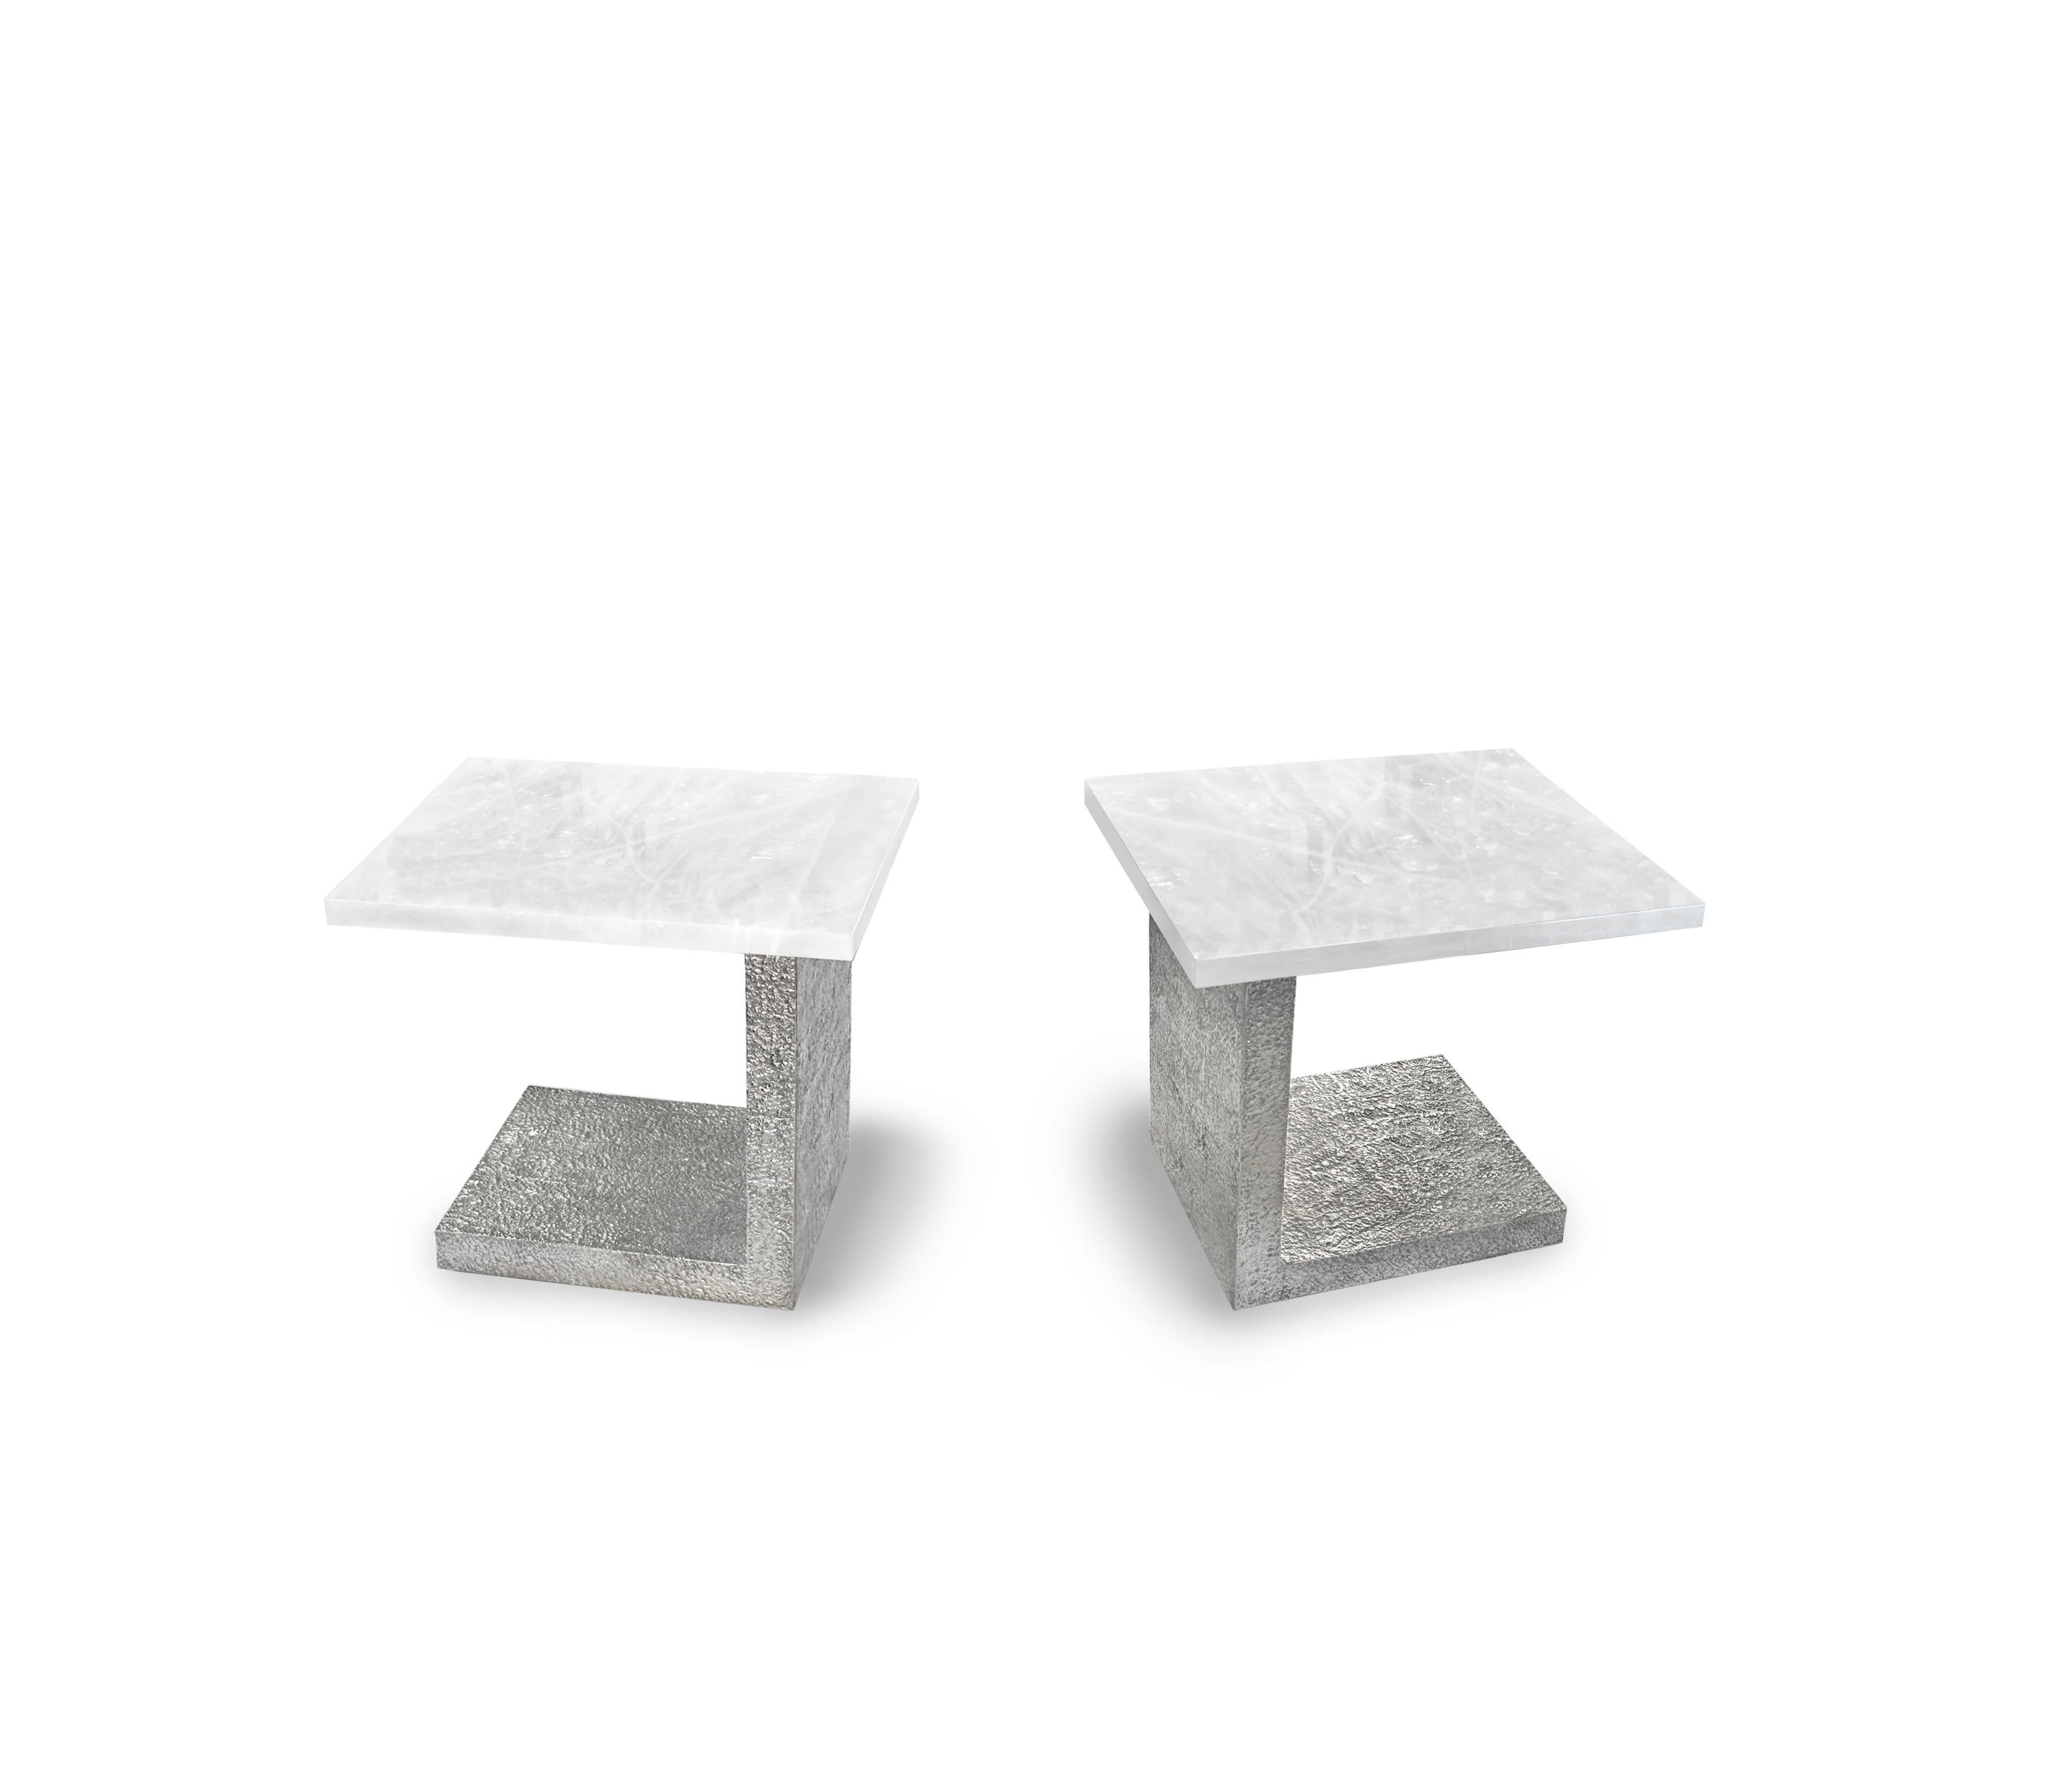 Pair of luxury white rock crystal quartz side tables with hammered nickel finish bases. Created by Phoenix Gallery, NYC.
Custom size, finish, and quantity upon request.